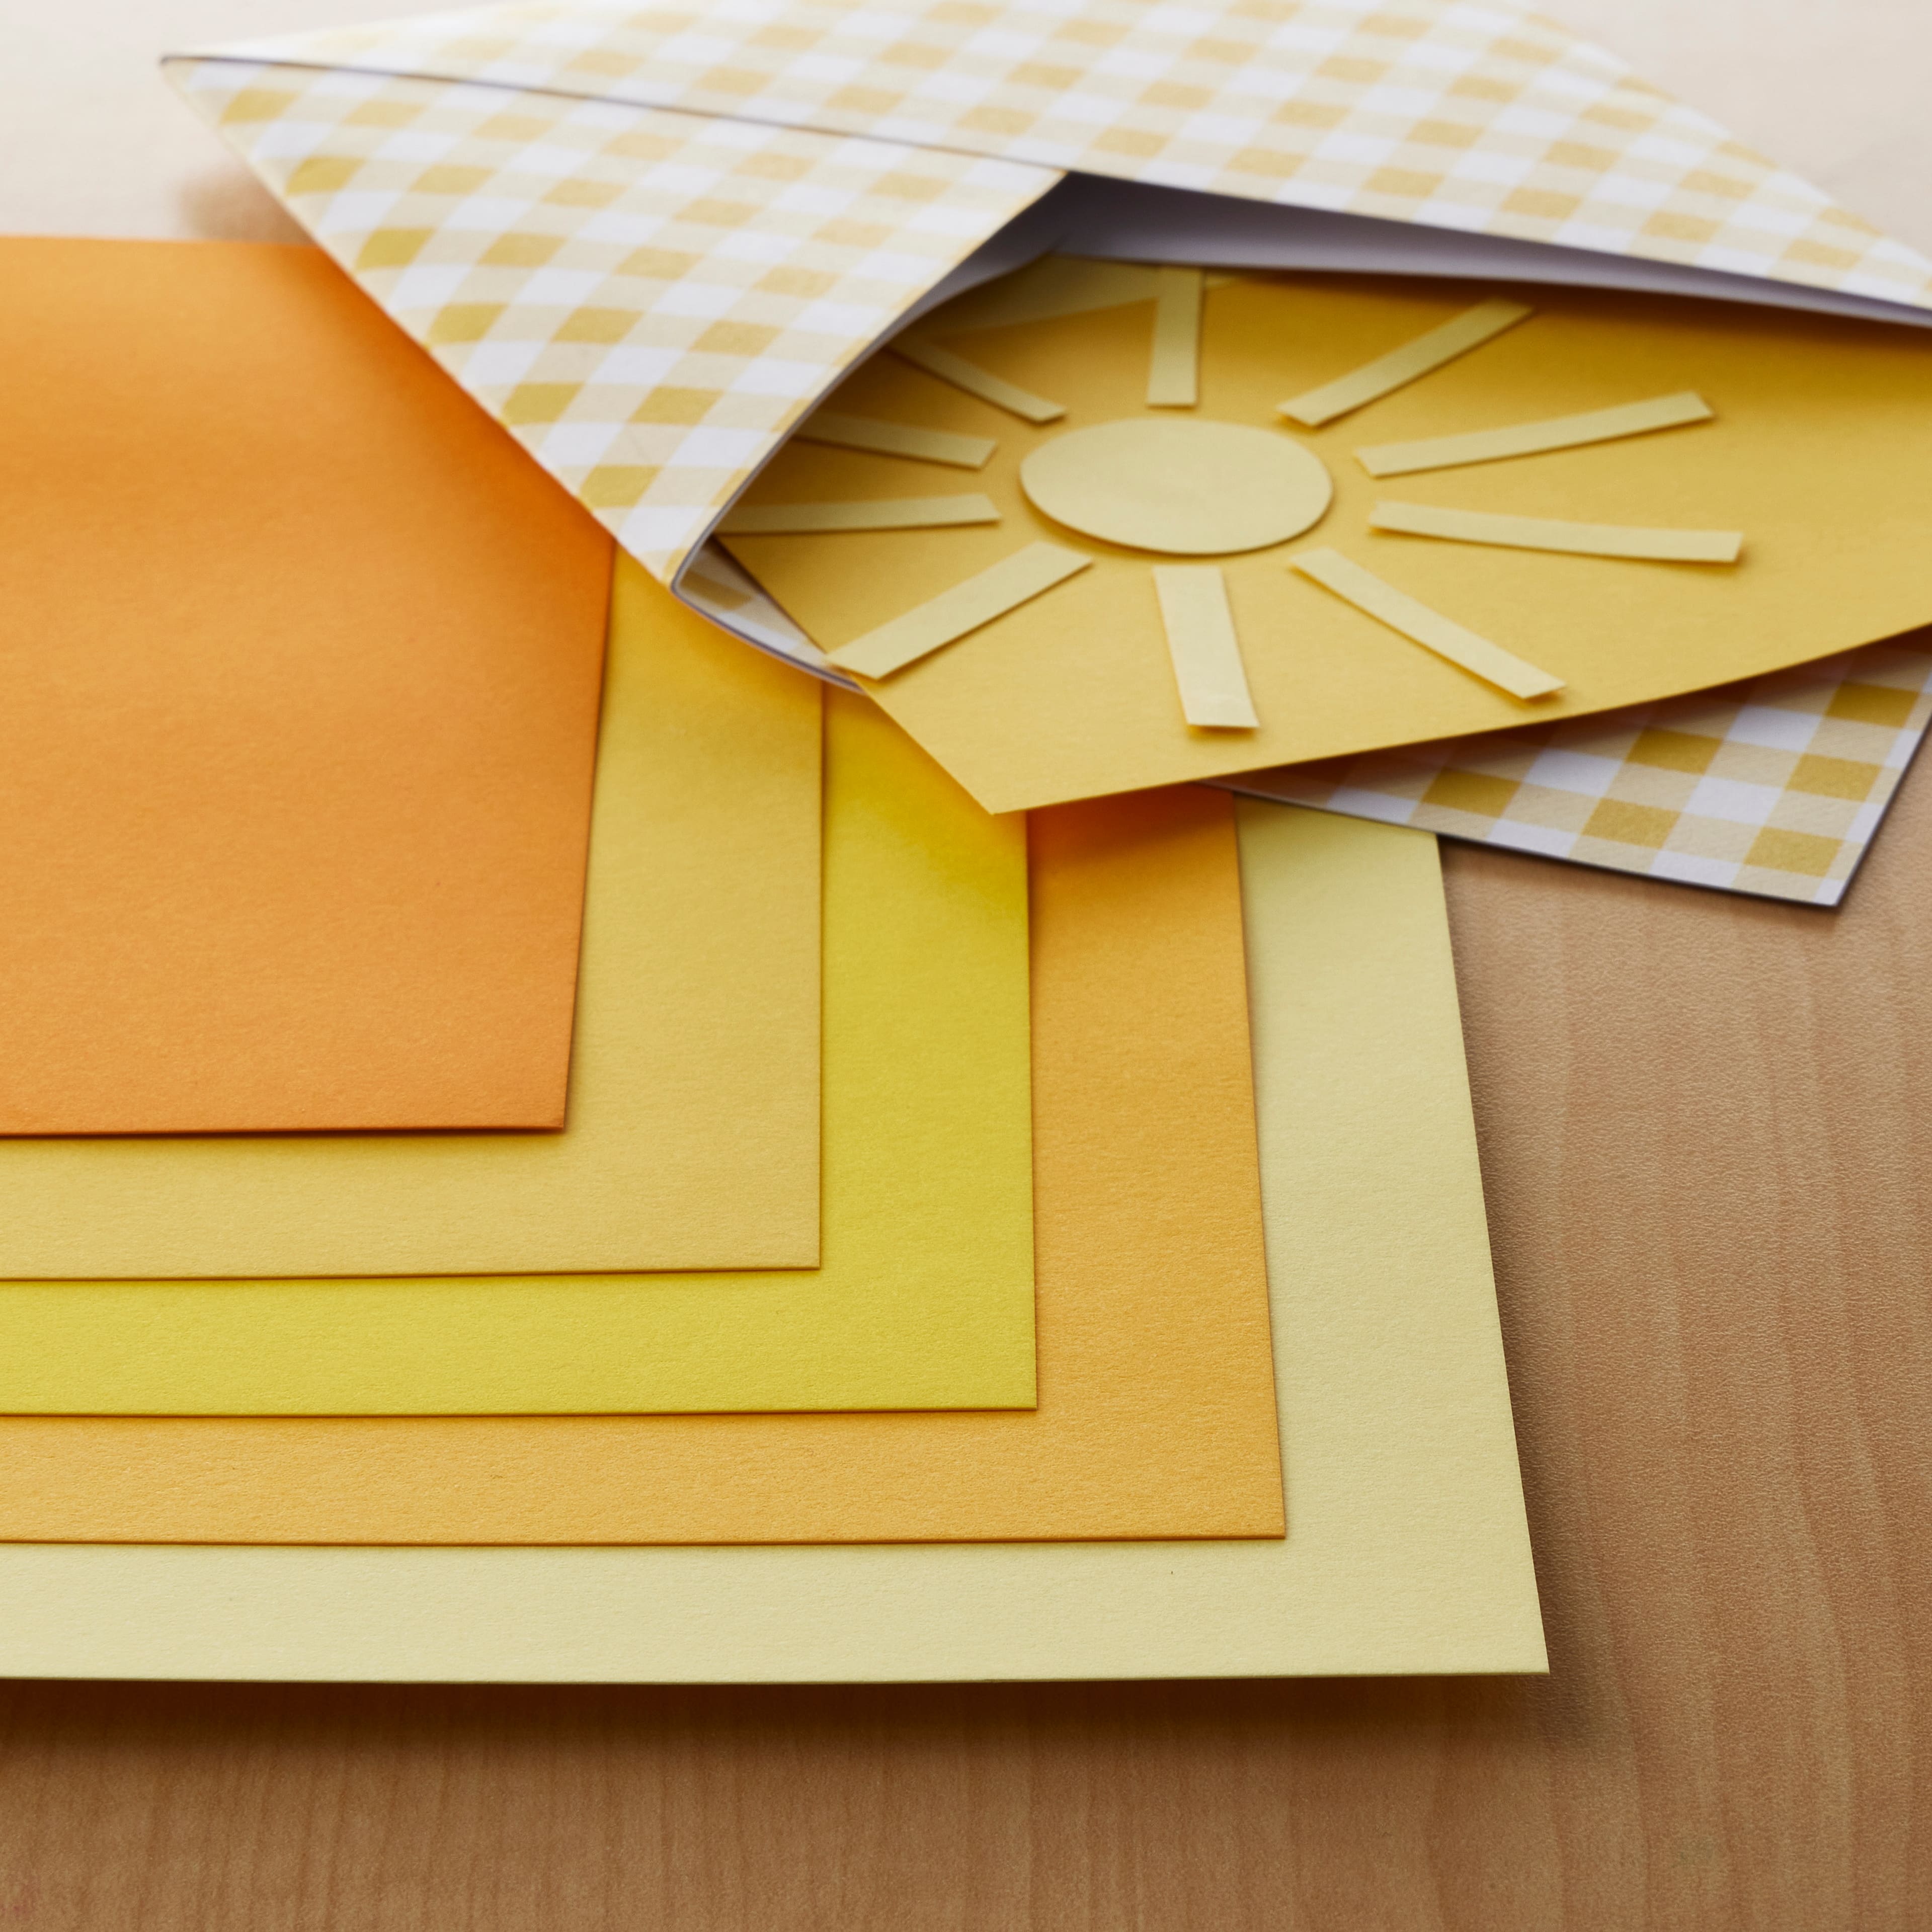 12 Packs: 100 ct. (1,200 total) Citrus 6&#x22; x 6.5&#x22; Cardstock Paper by Recollections&#x2122;